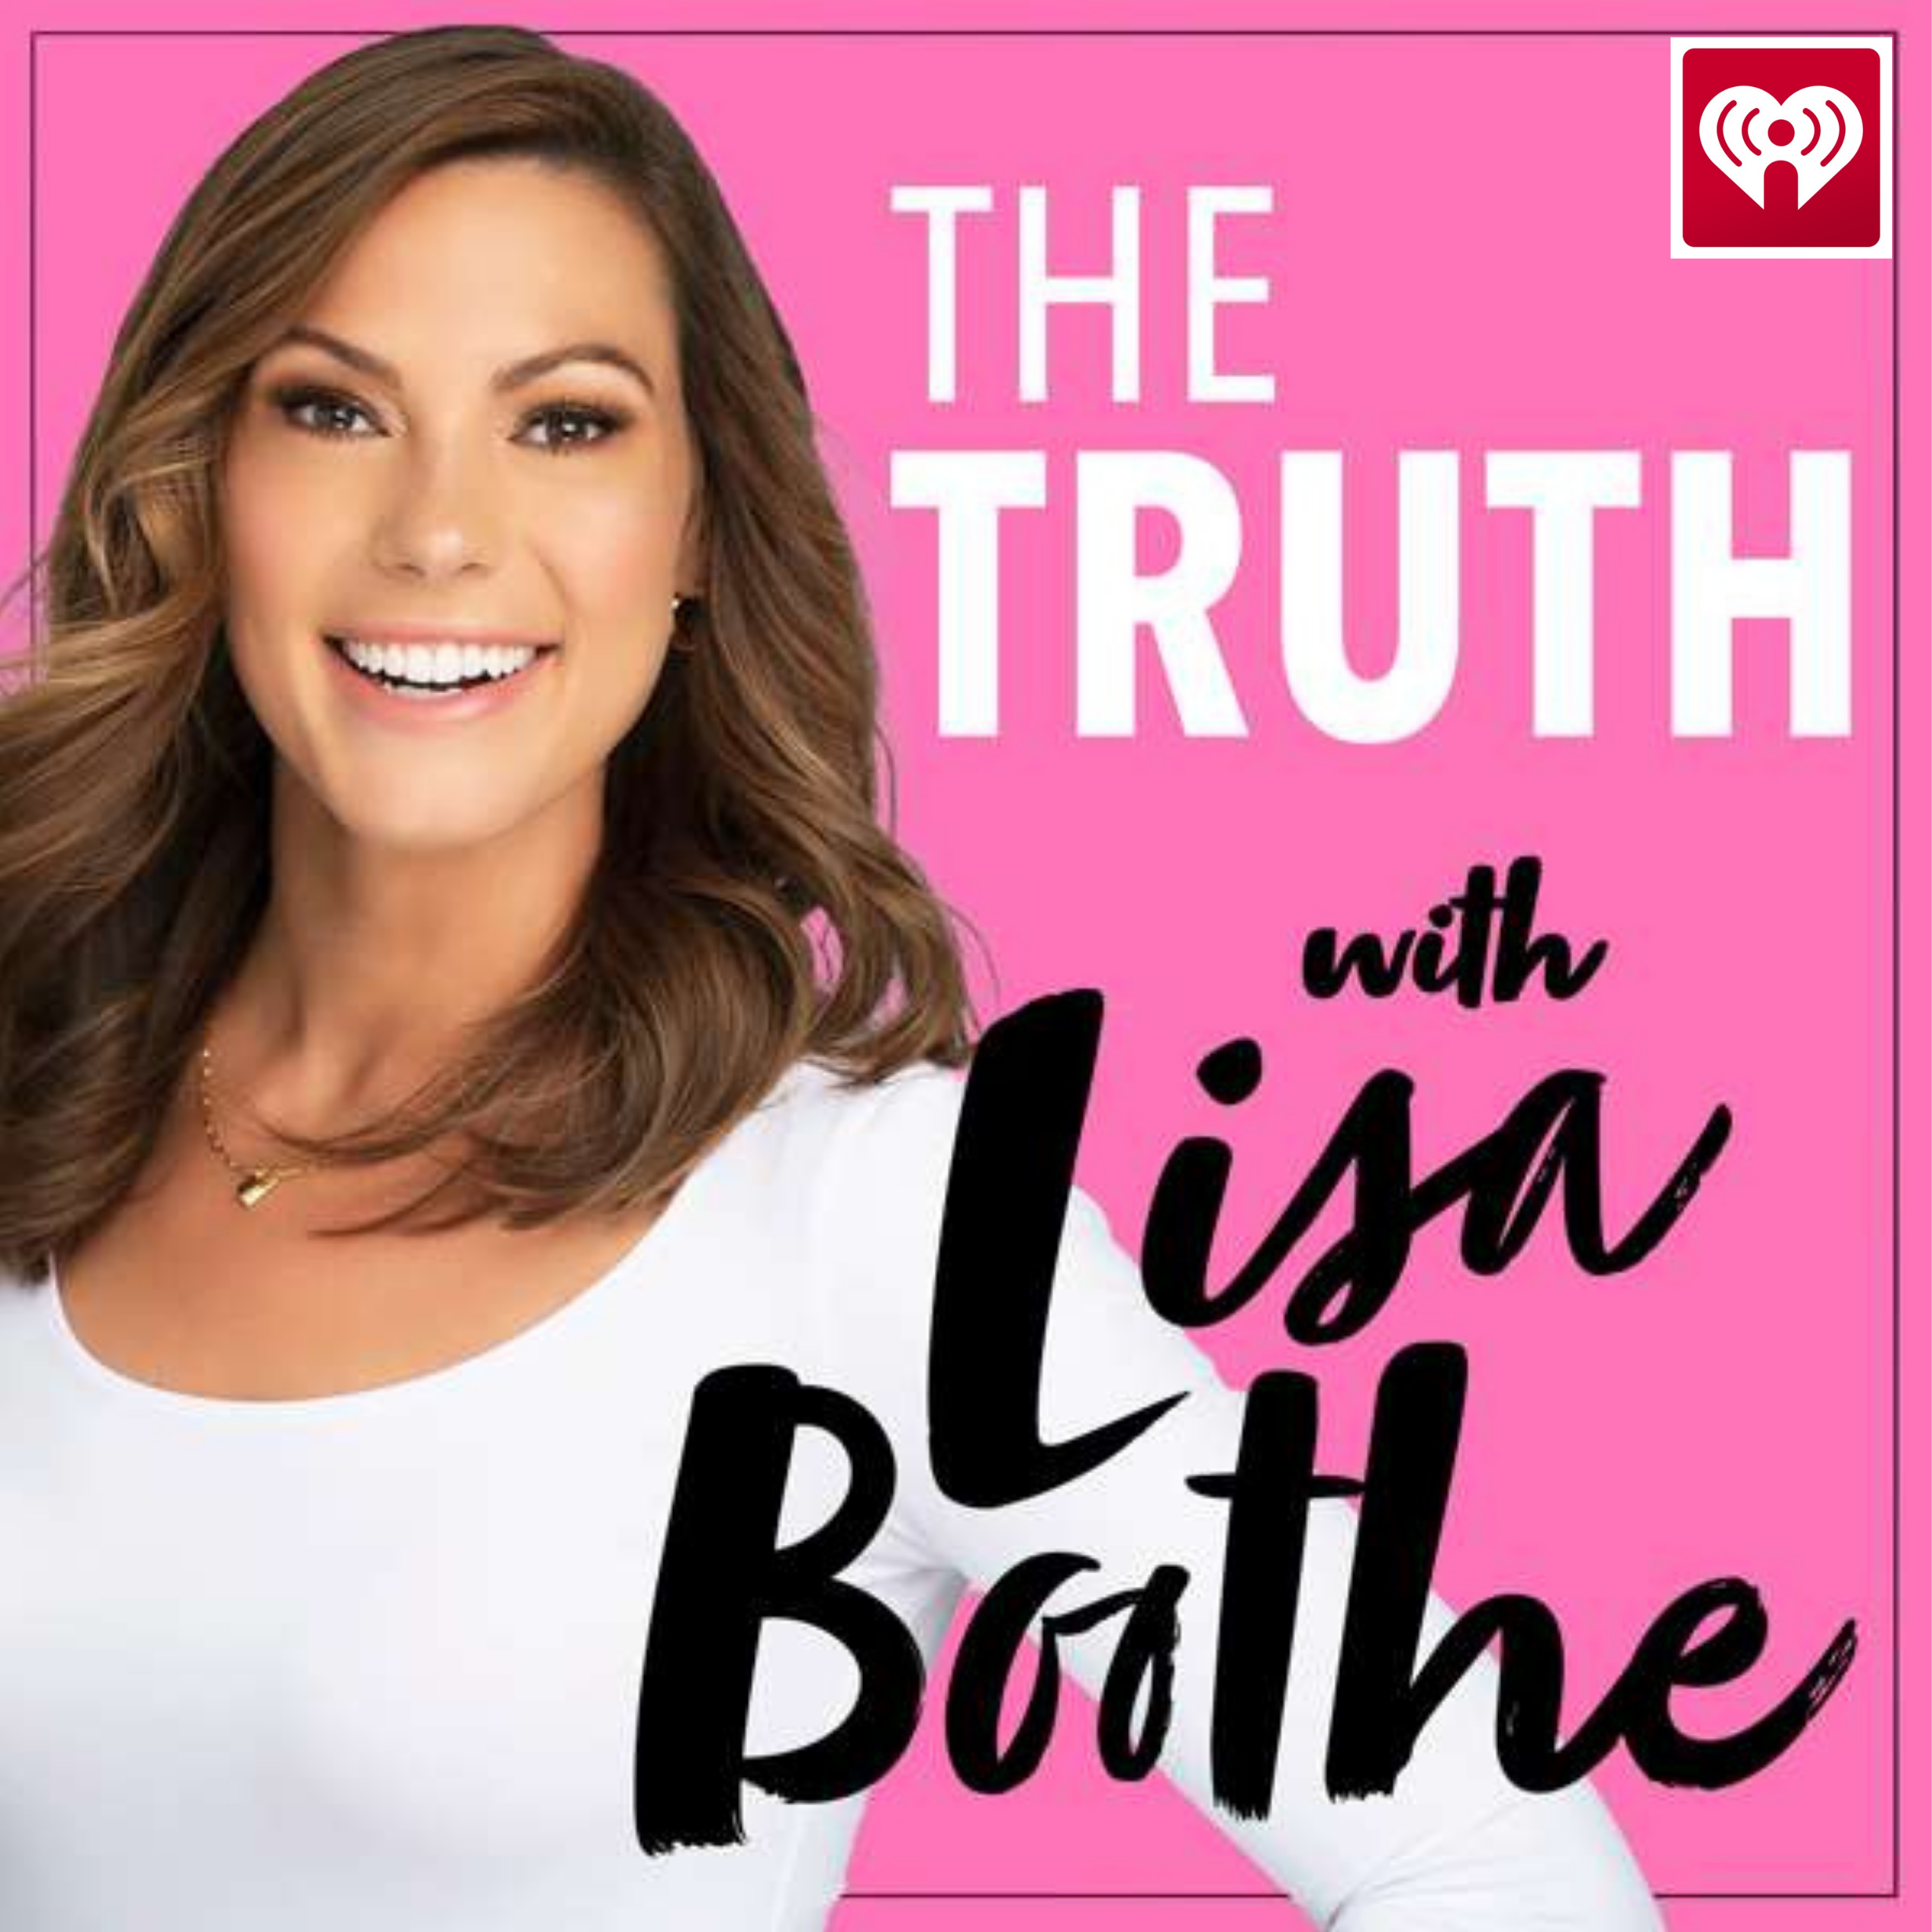 The Truth with Lisa Boothe: California’s Gender-Neutral Toy Section with Greg Burt